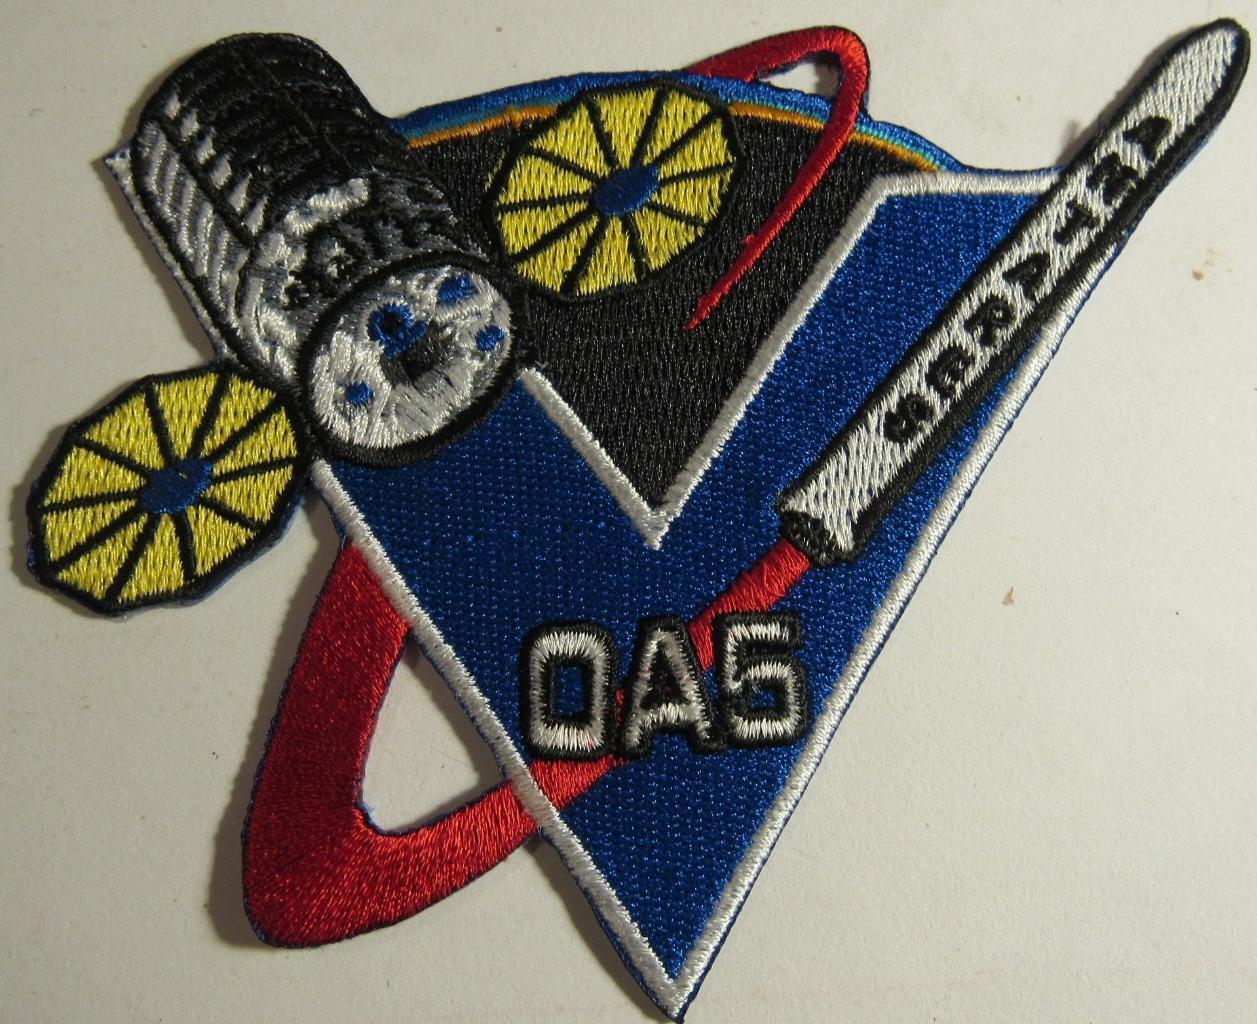 Cygnus Payload Antares Oa-5 Space Vehicle Patch Nasa Iss Commercial Resupply